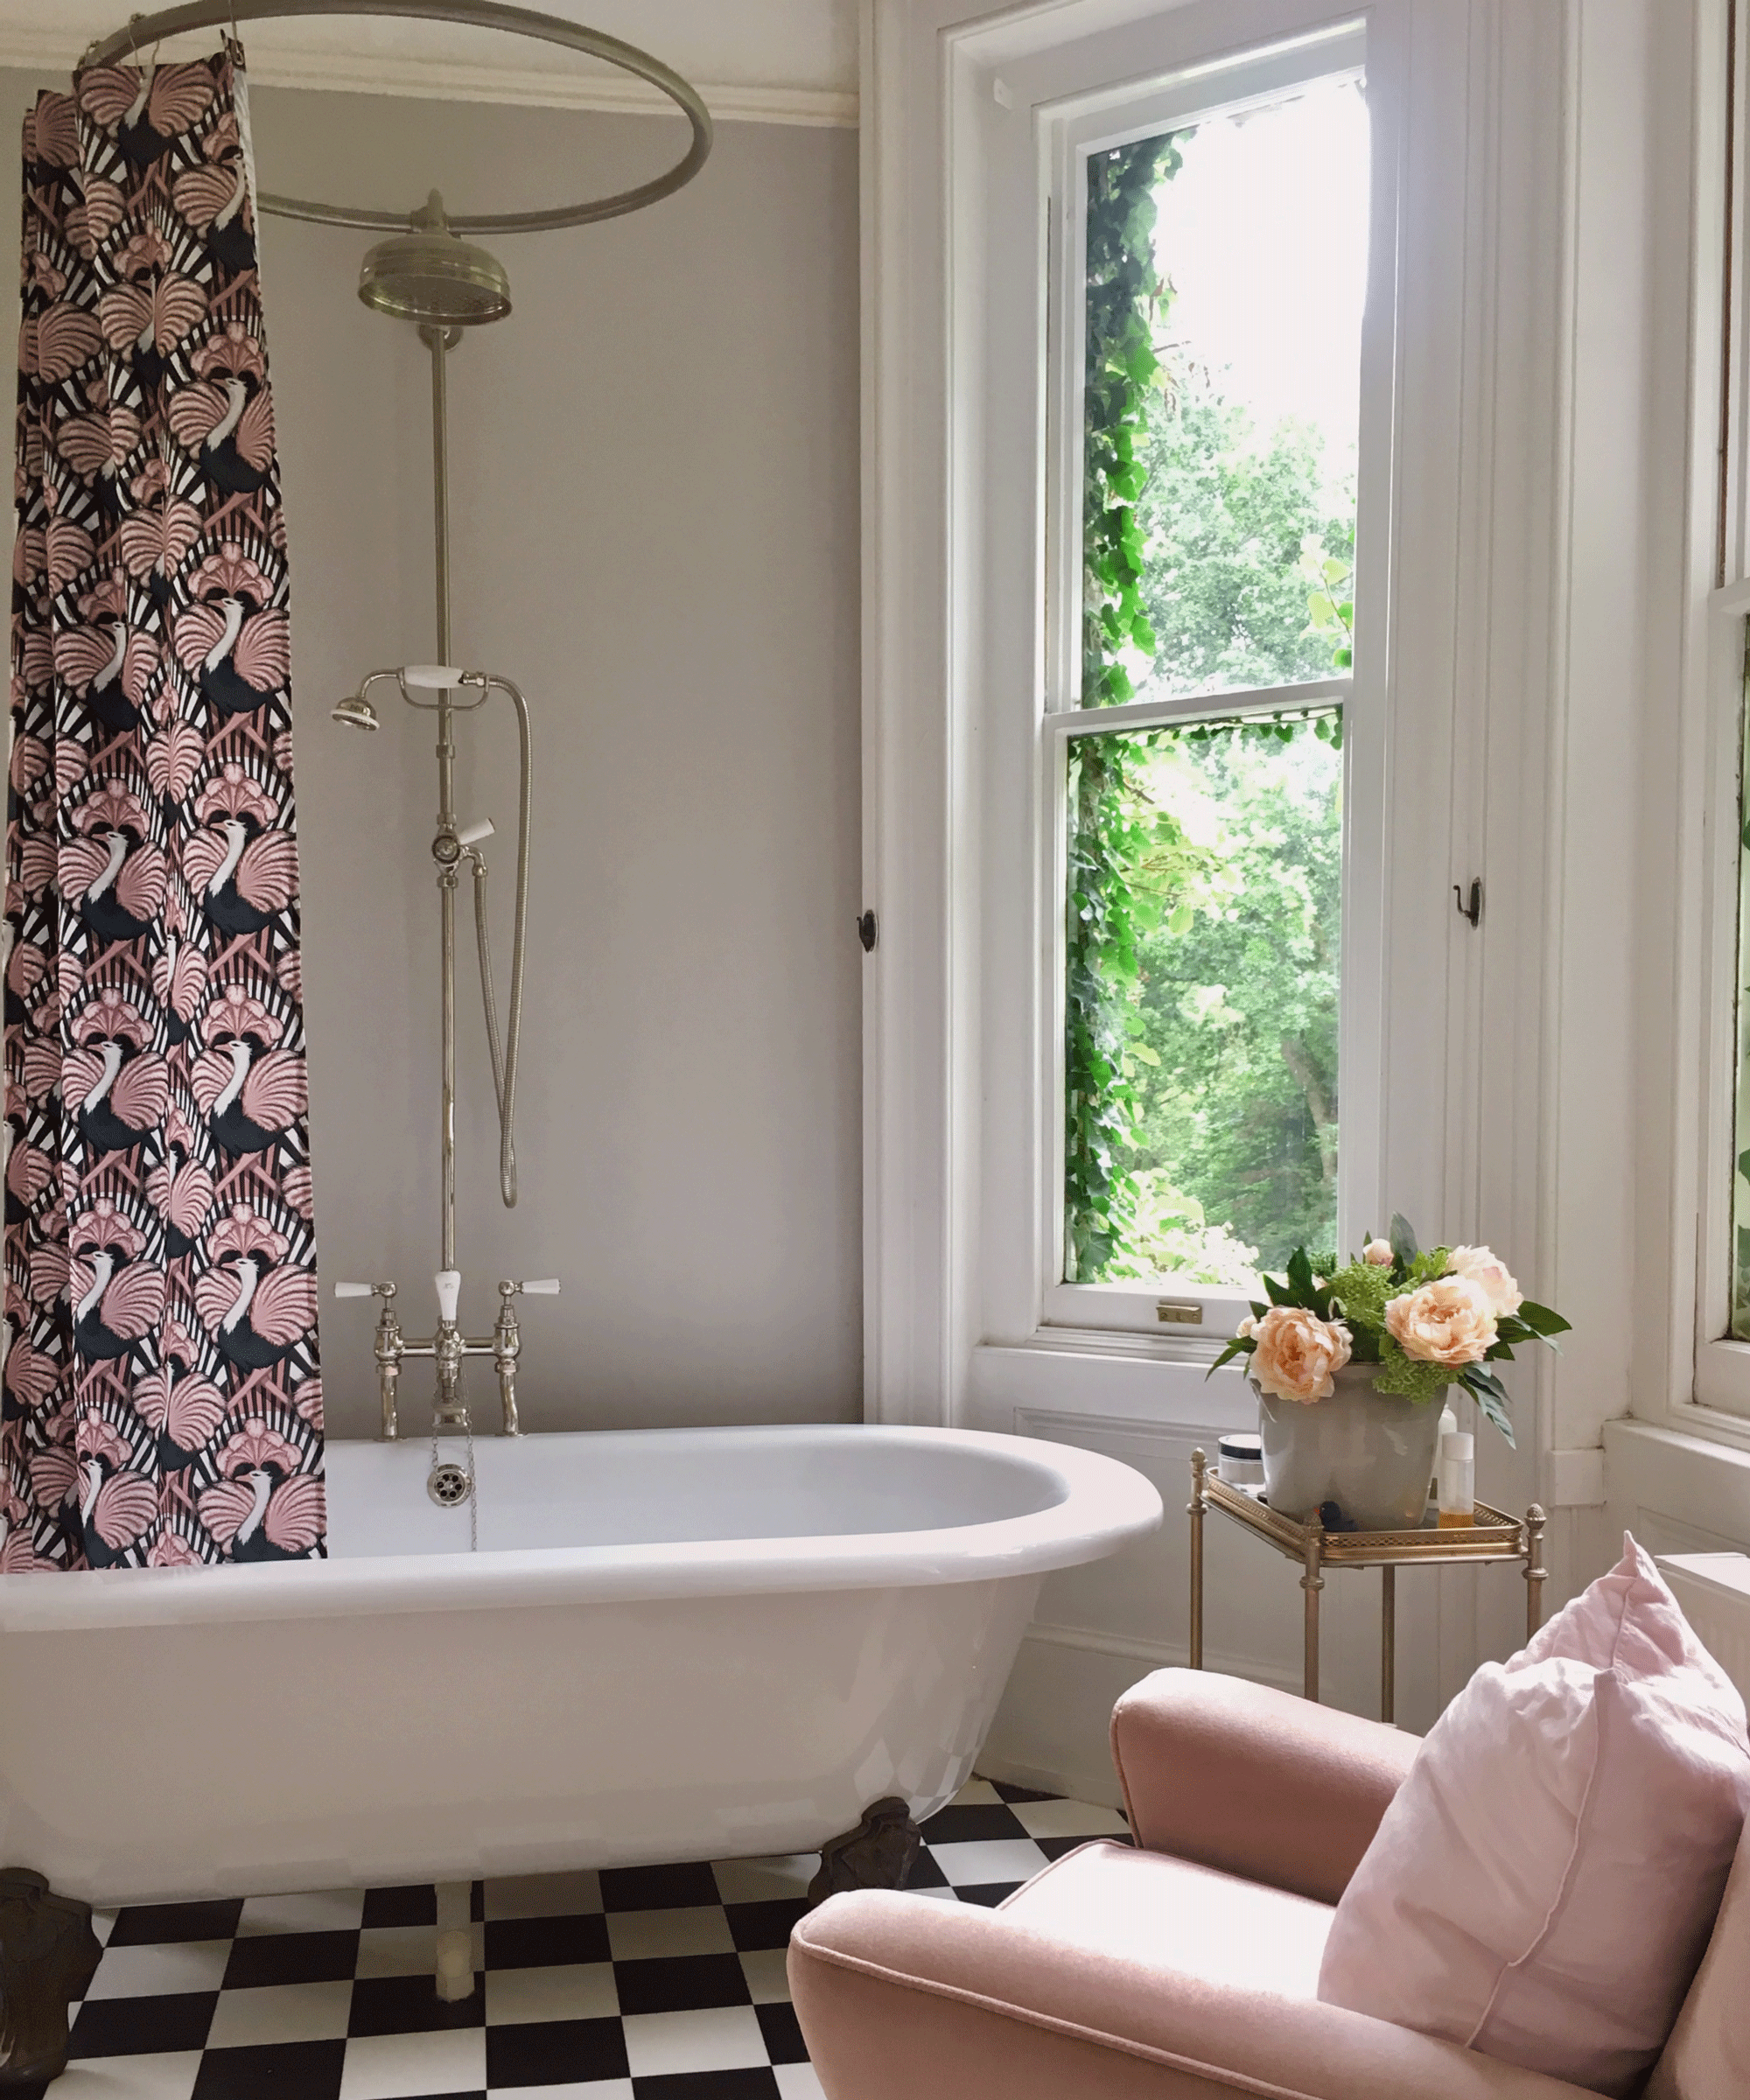 Patterned shower curtain over bath